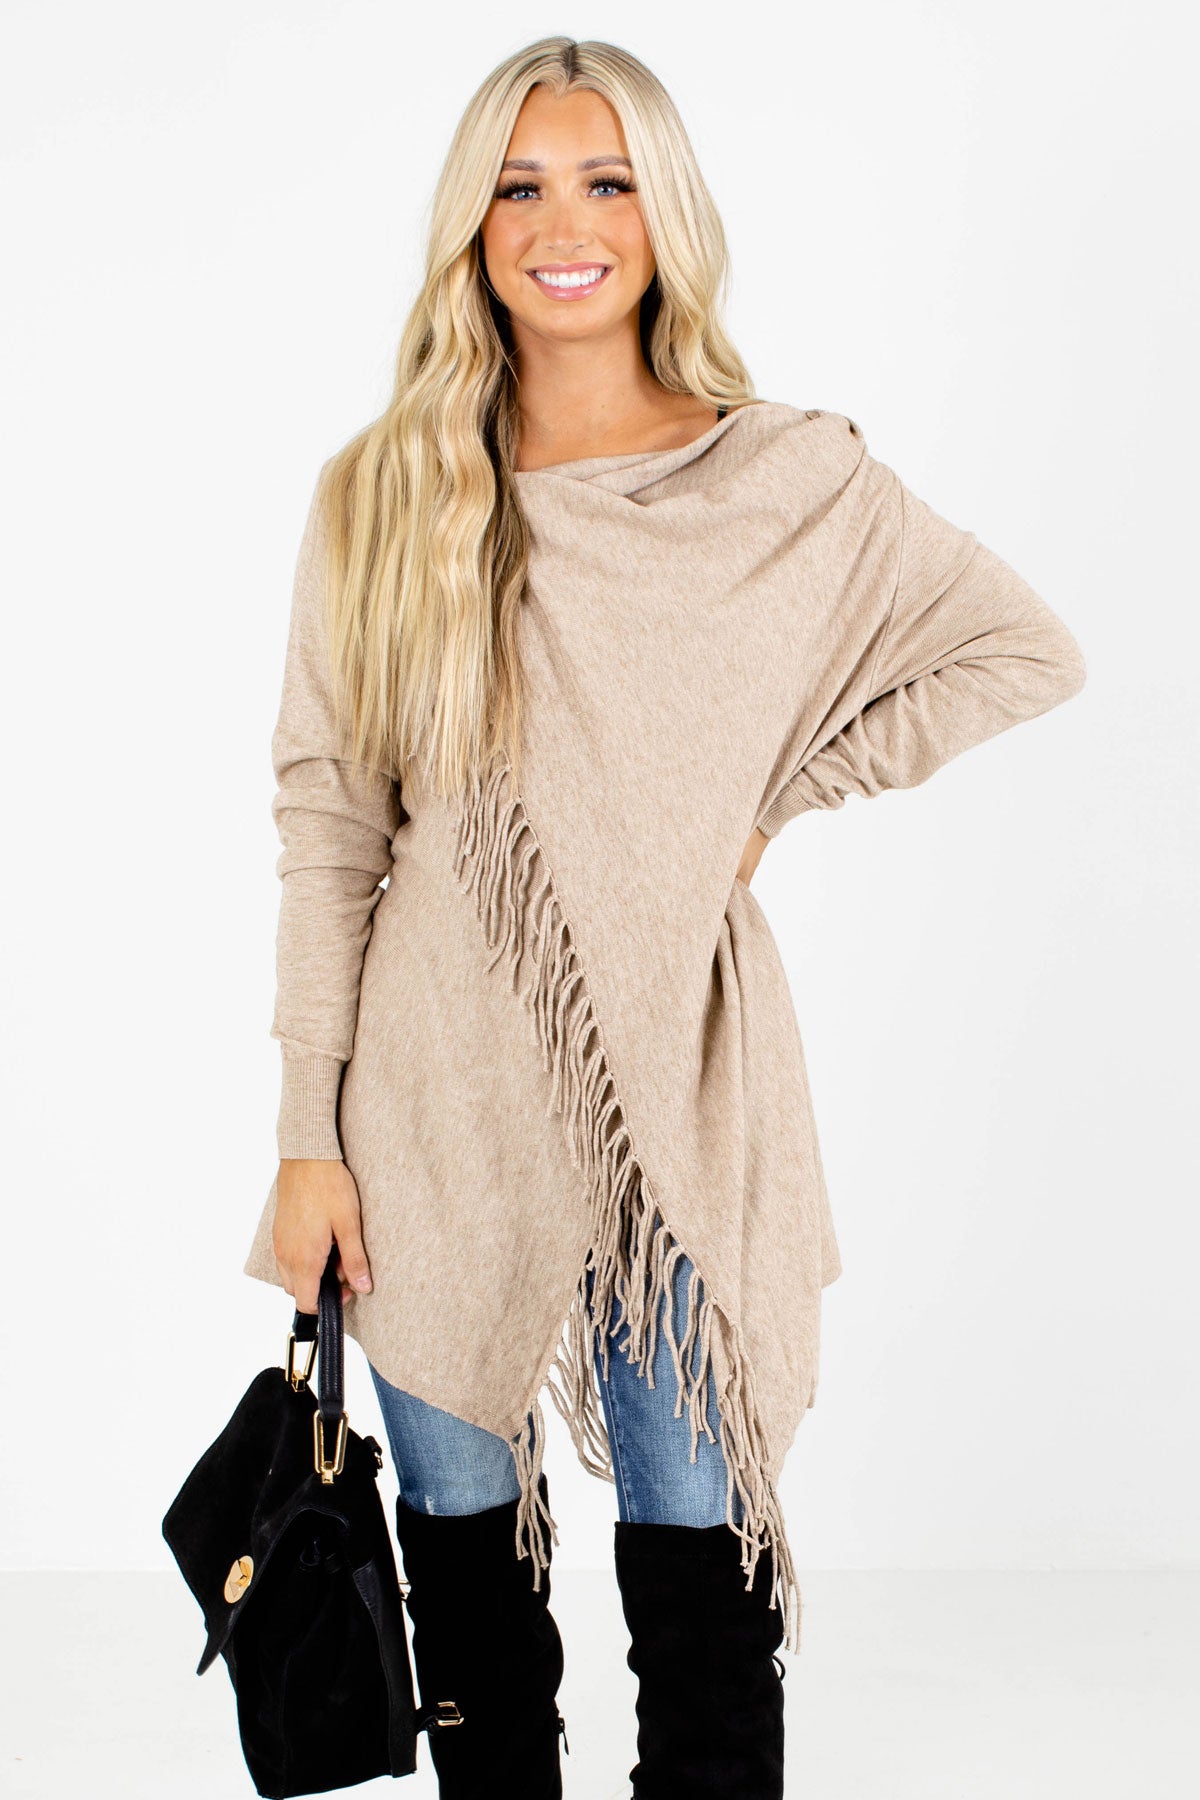 Taupe Brown Fringe Accented Boutique Cardigans for Women